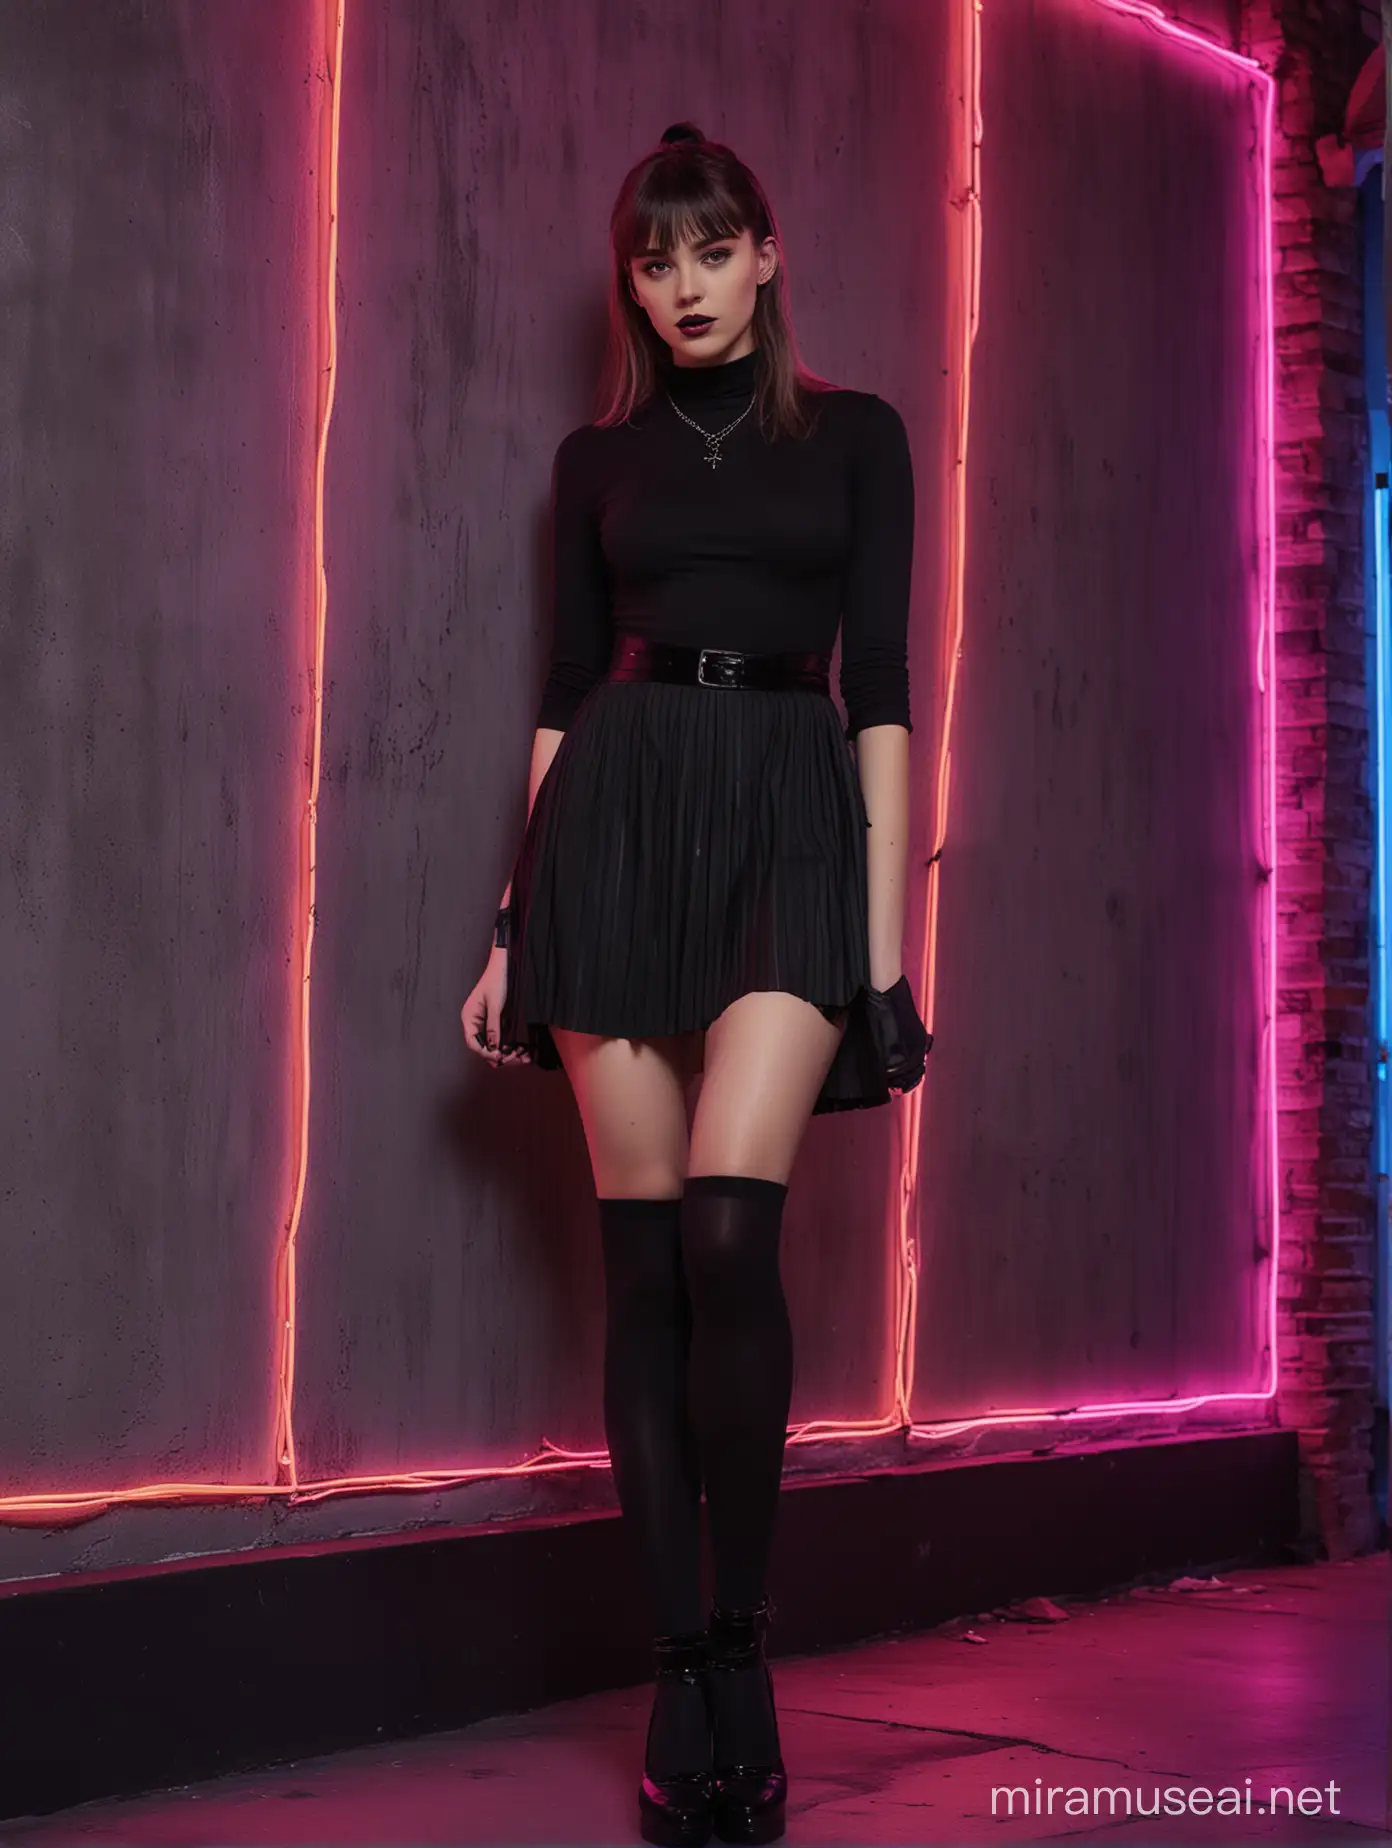 NeonLit Vintage Chic Girl in Black Stockings and MixedEra Dress